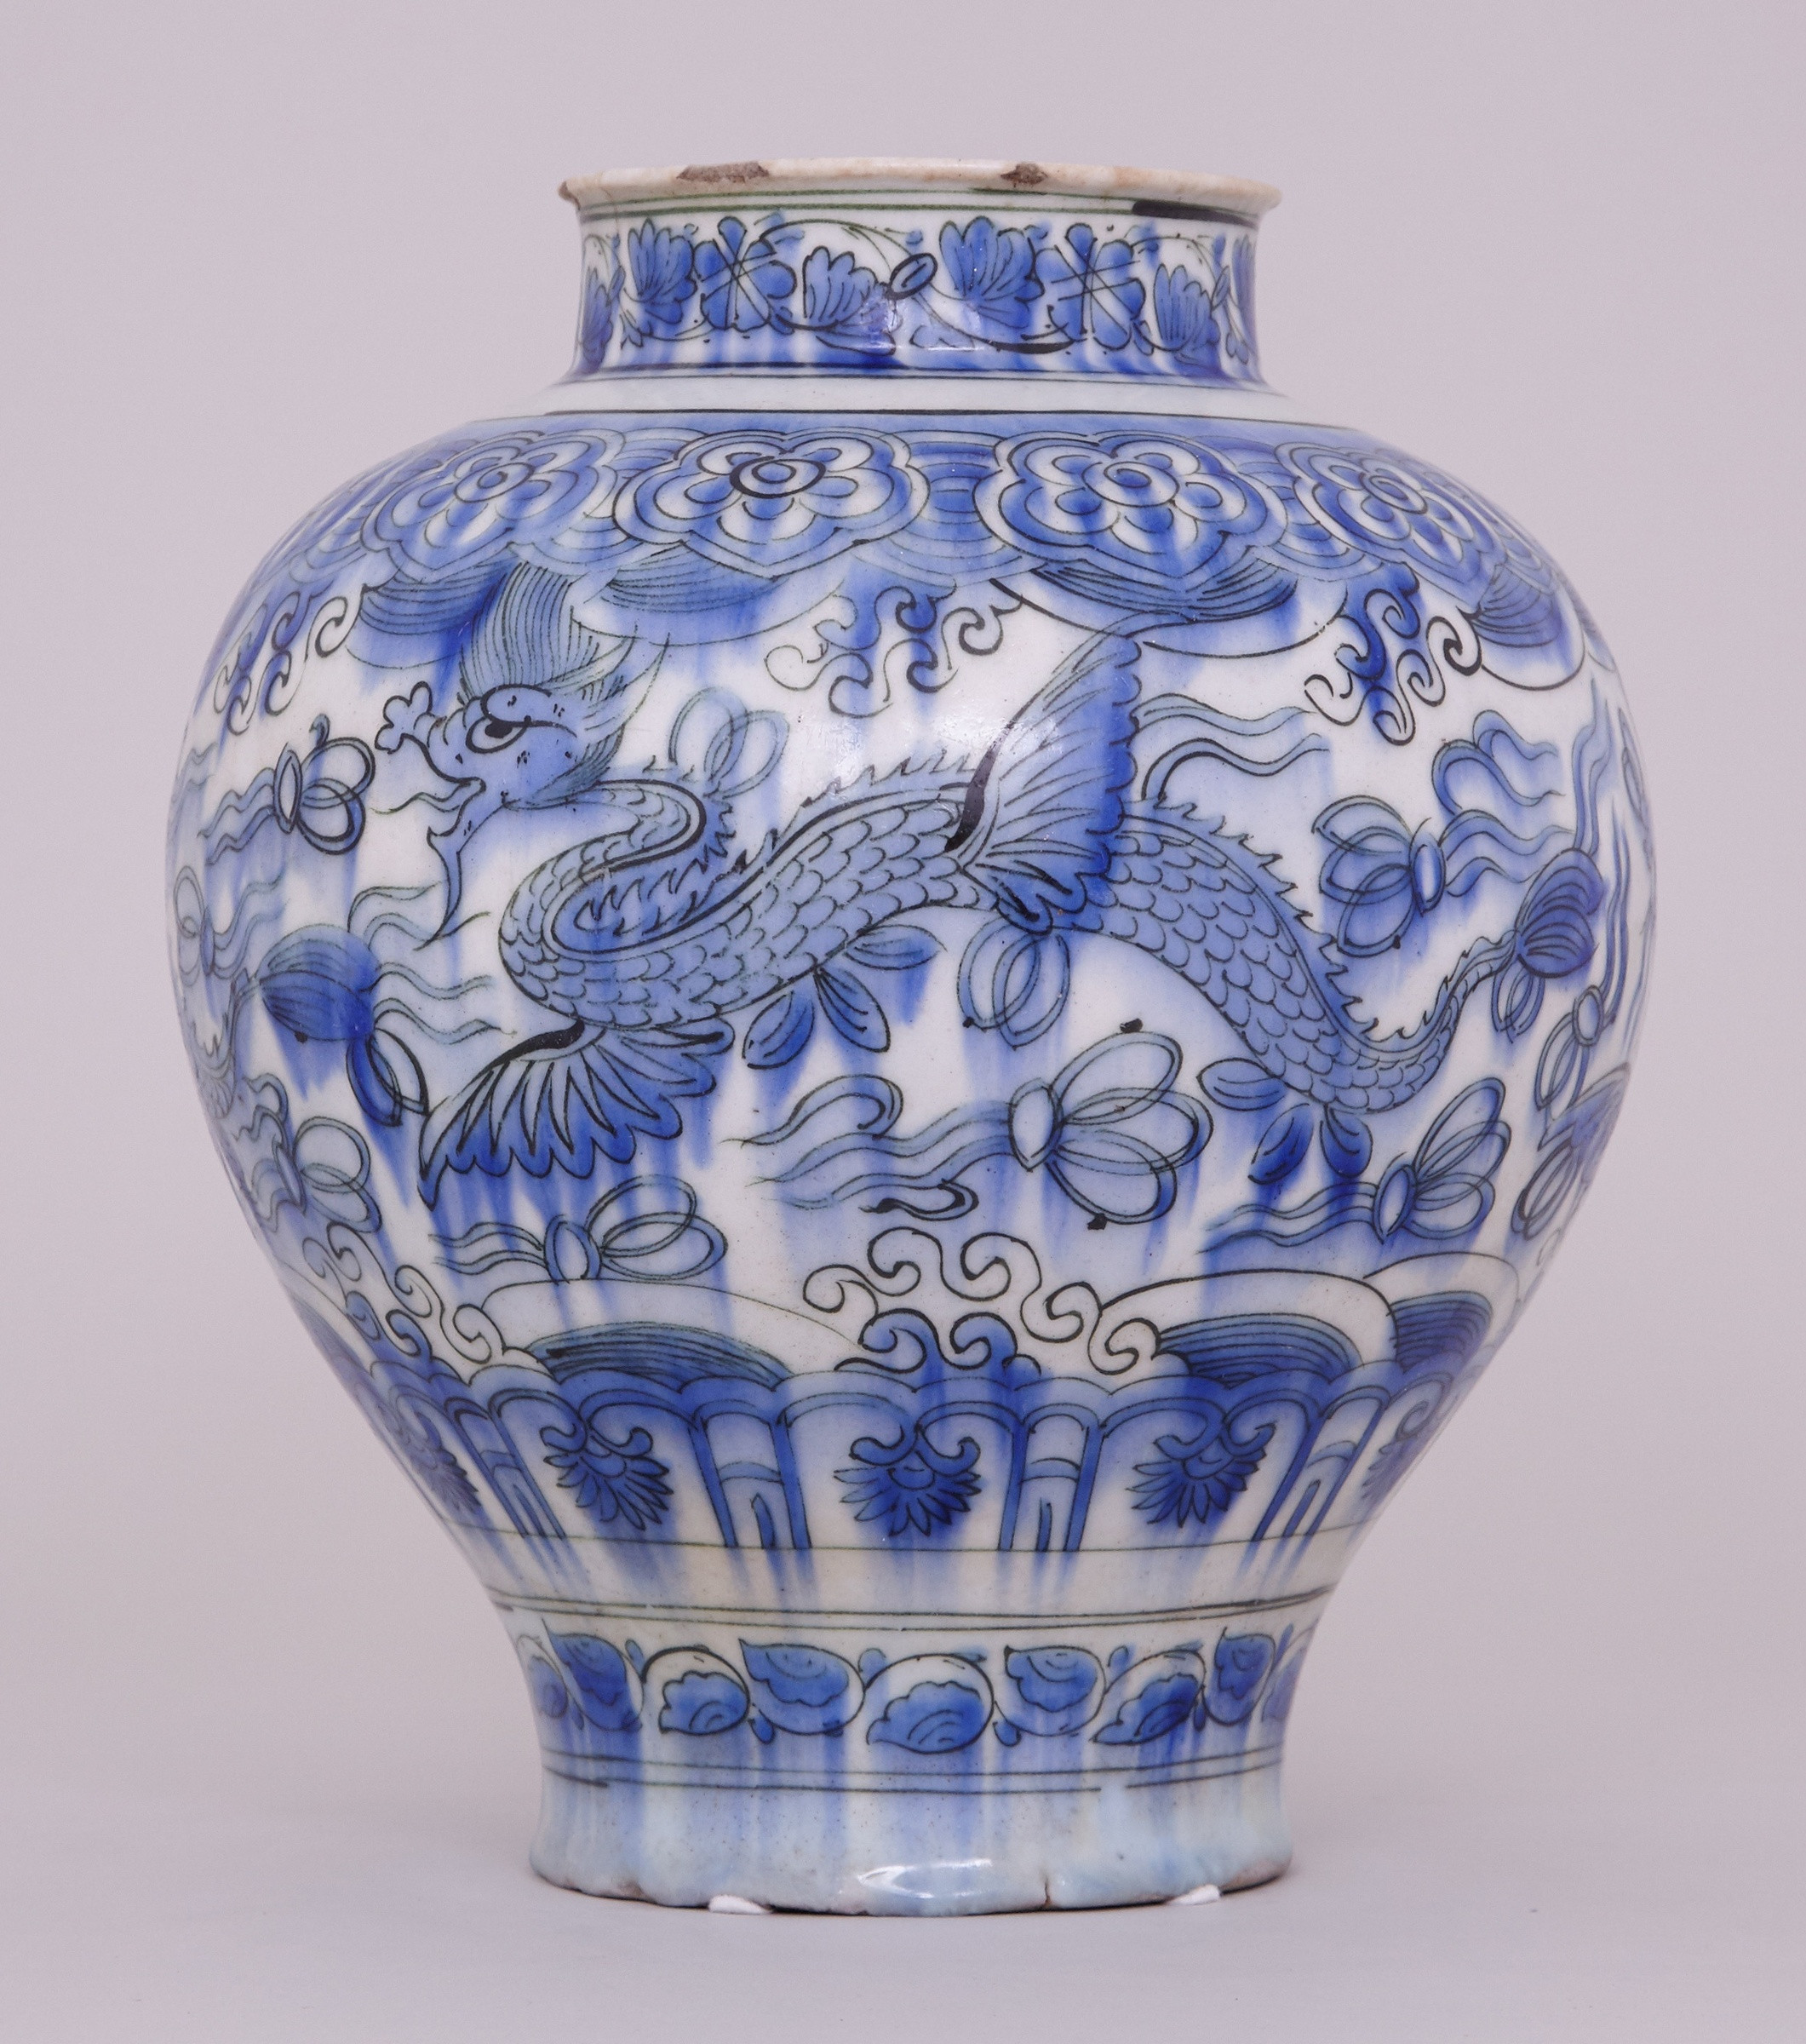 20 Perfect Chinese Vases History 2024 free download chinese vases history of a blue and white persian safavid jar 17th century anita gray with regard to a blue and white persian safavid jar